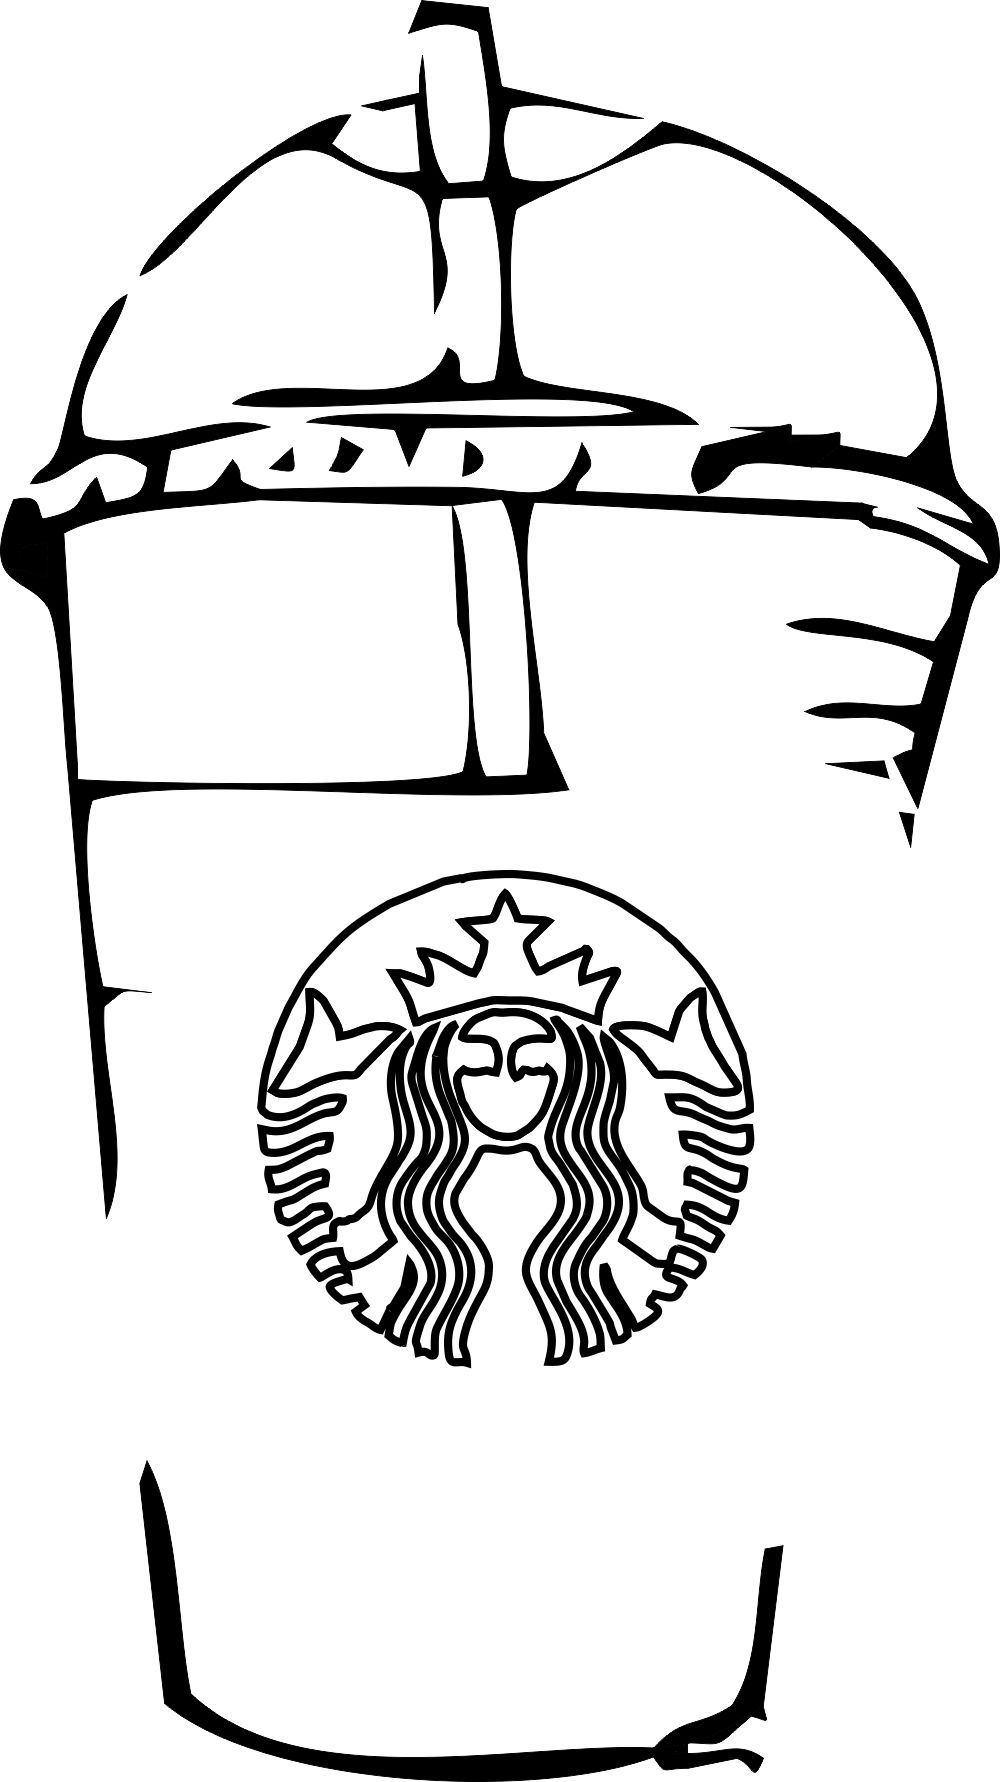 starbucks coloring page simple